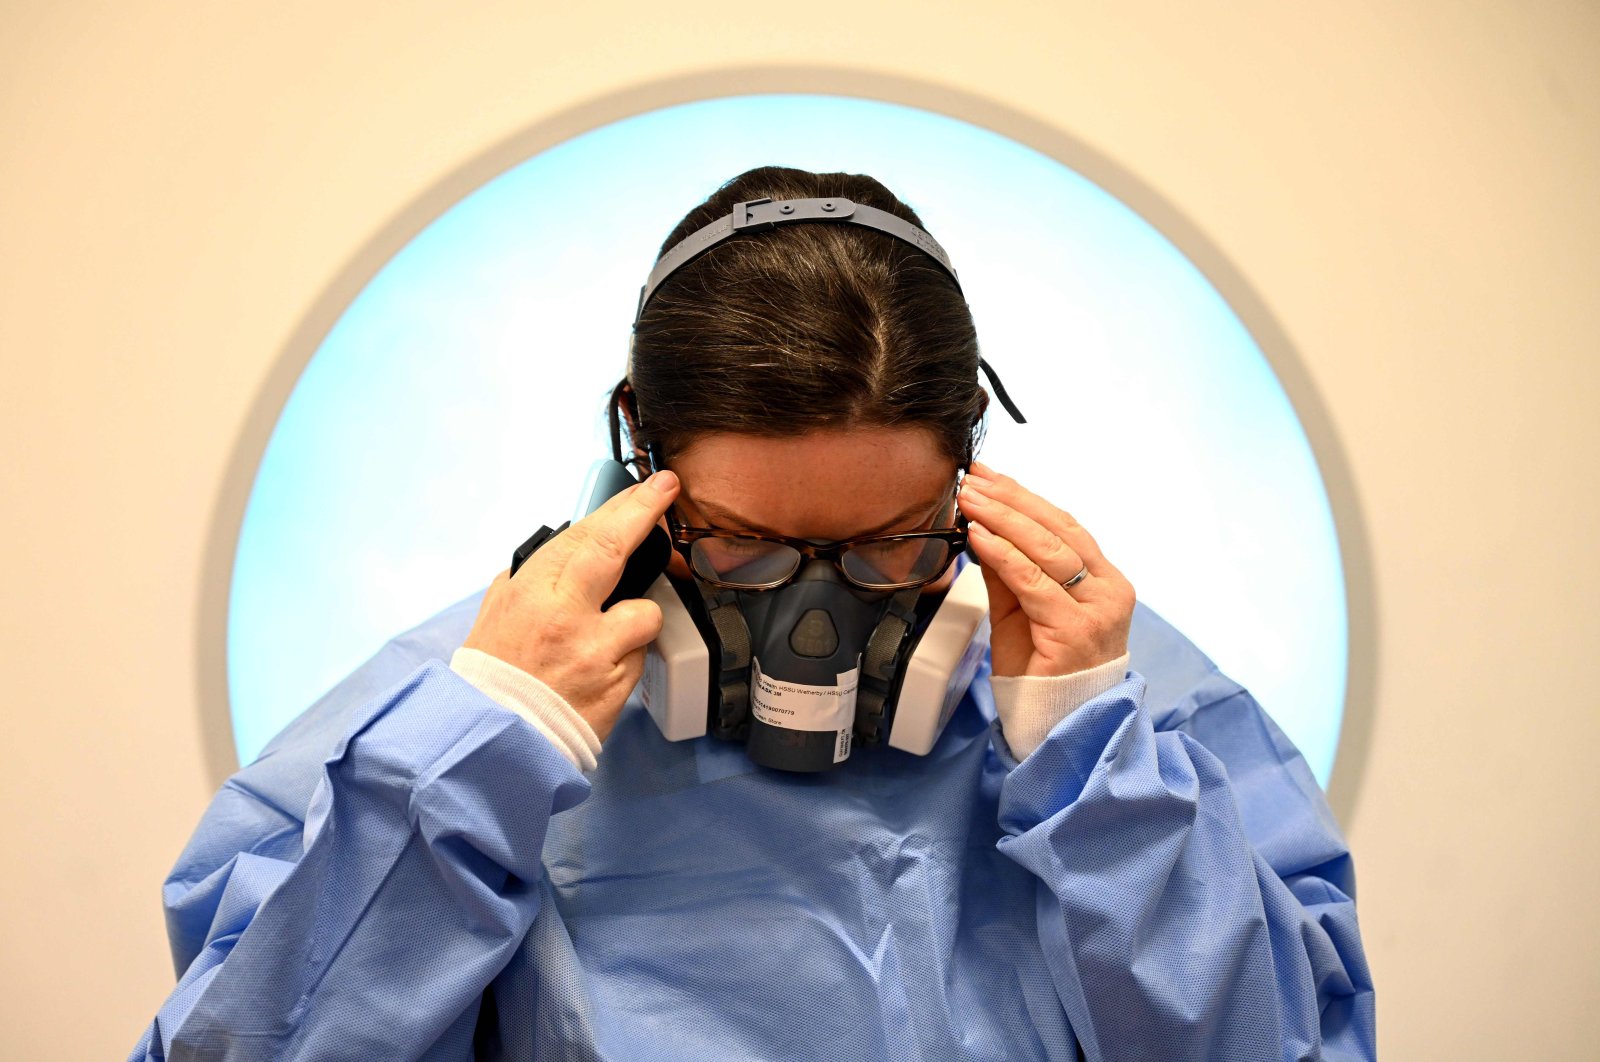 A member of the clinical staff adjusts her glasses as she dons personal protective equipment (PPE) including a mask and gown at the Intensive Care unit at Royal Papworth Hospital in Cambridge, on May 5, 2020. (AFP File Photo)